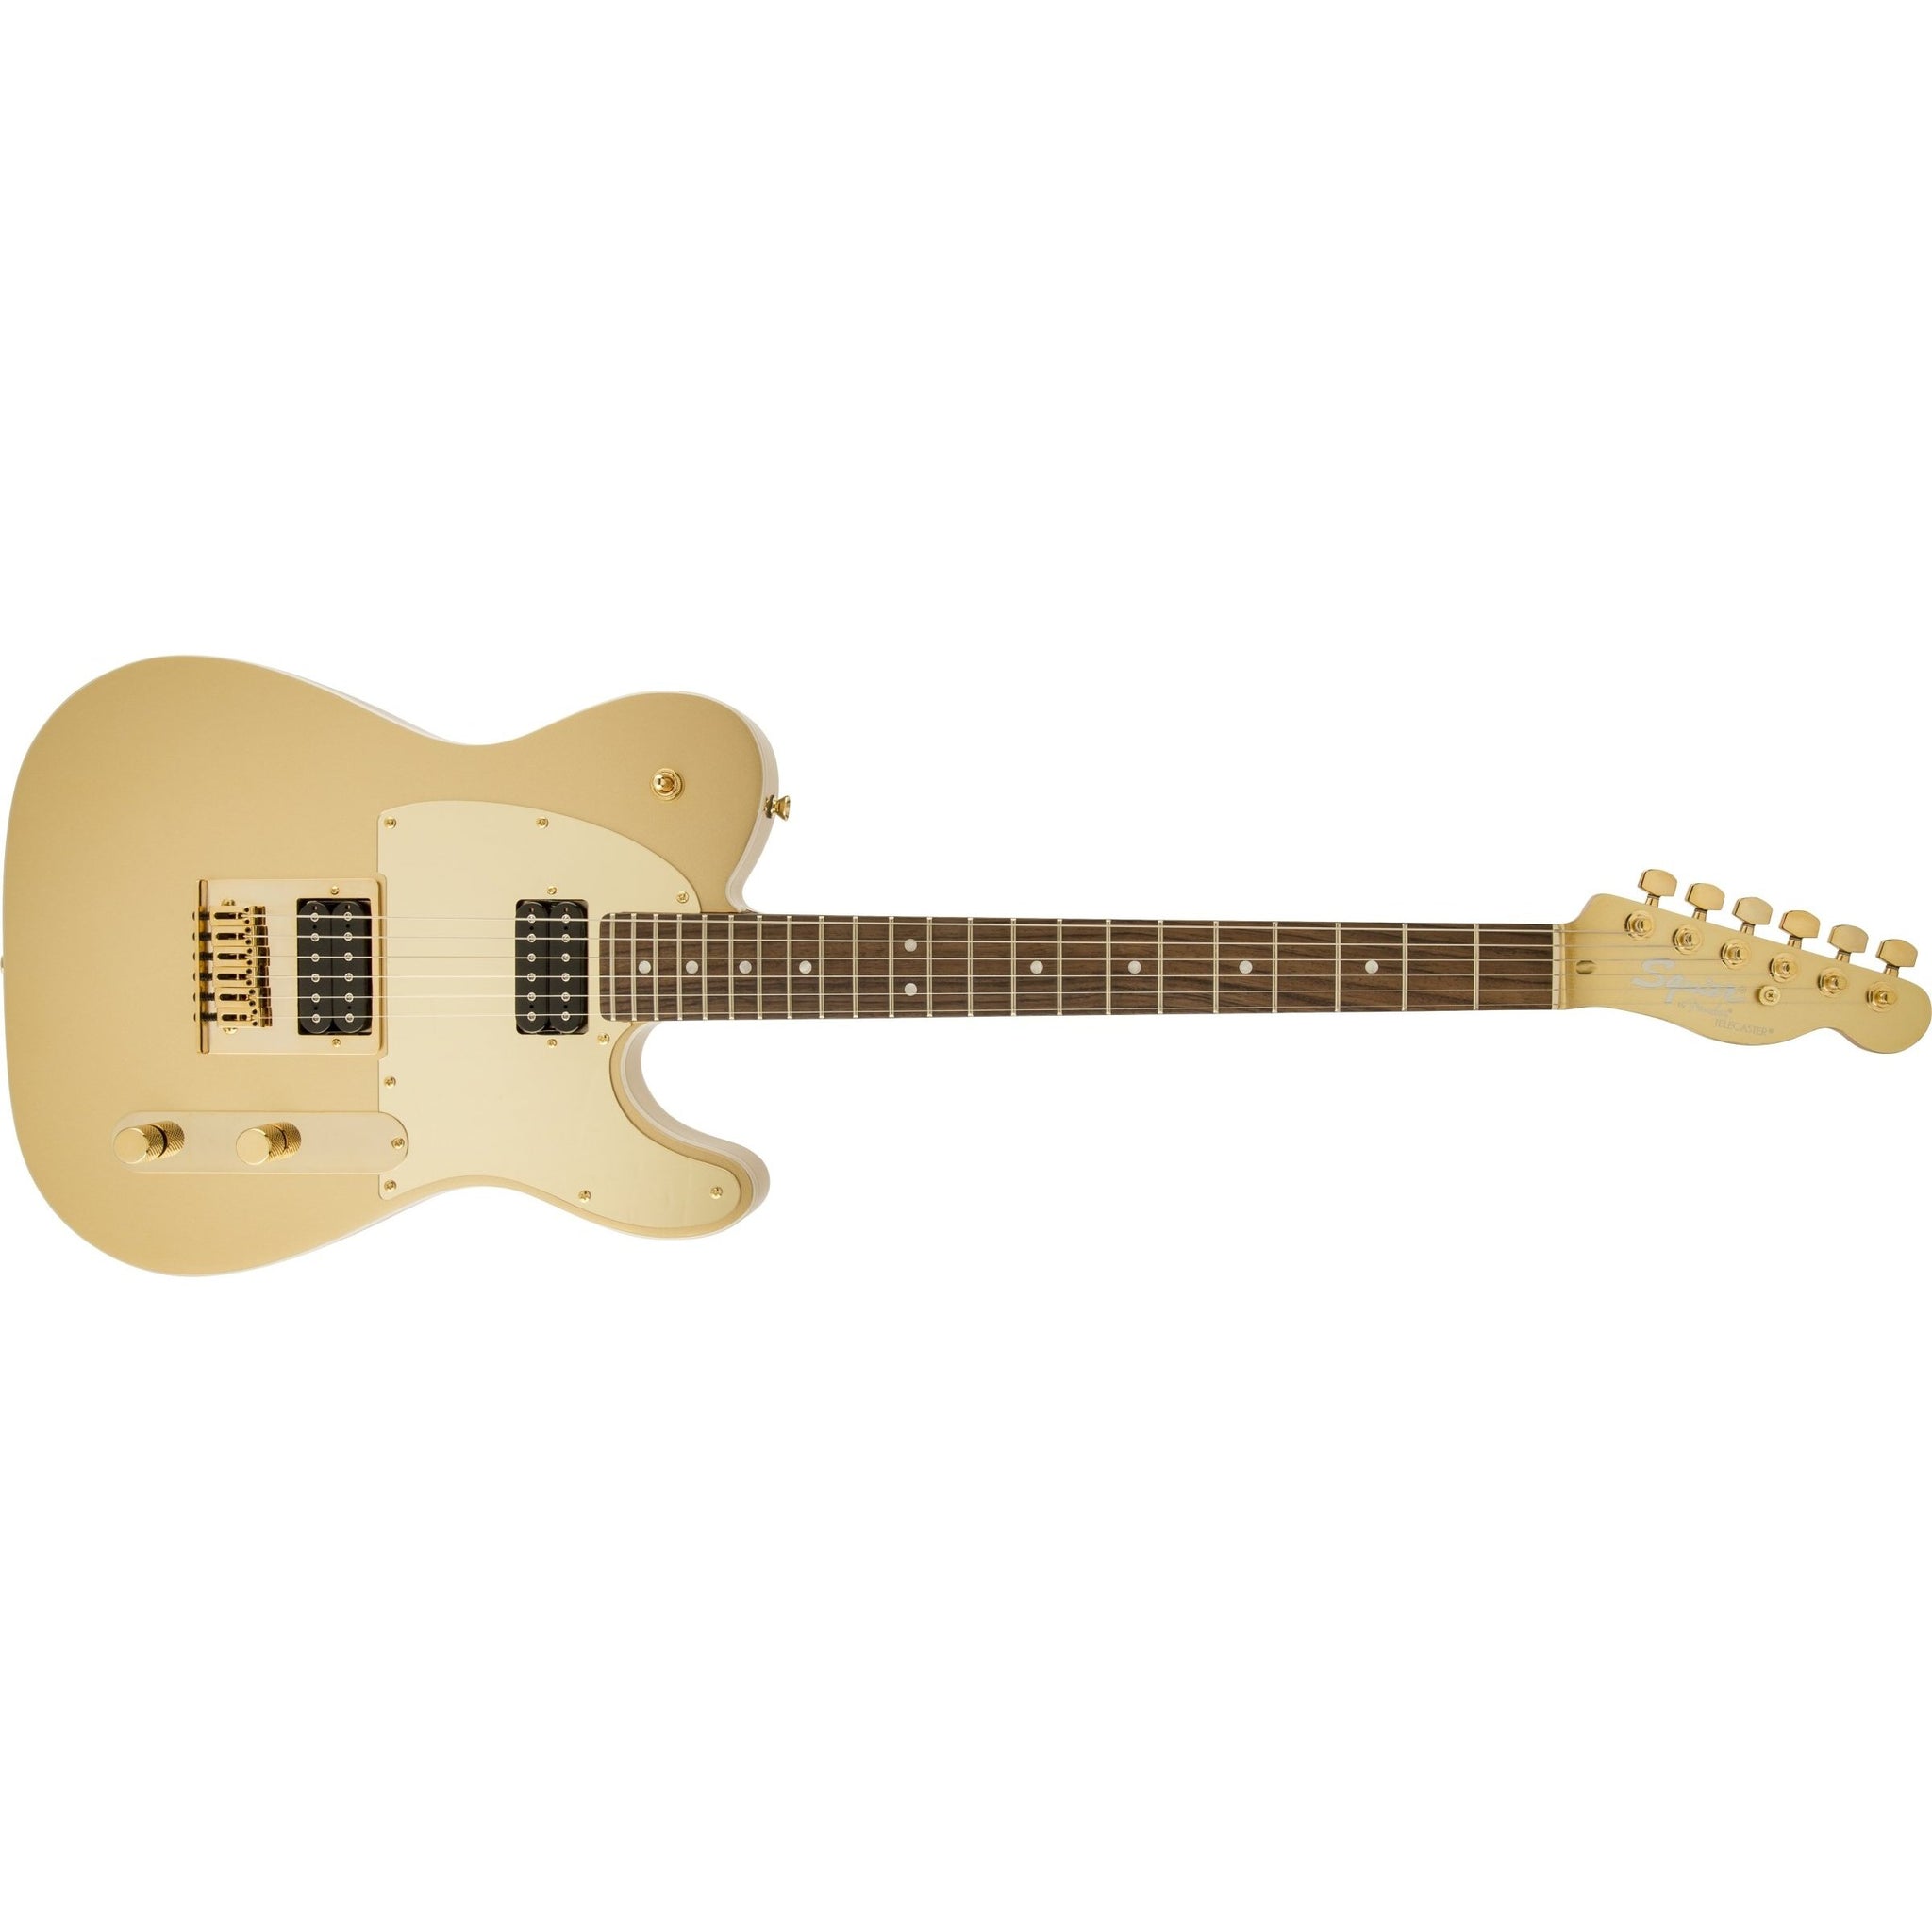 Fender Squier J5 Telecaster Electric Guitar-Frost Gold (Discontinued)-Music World Academy